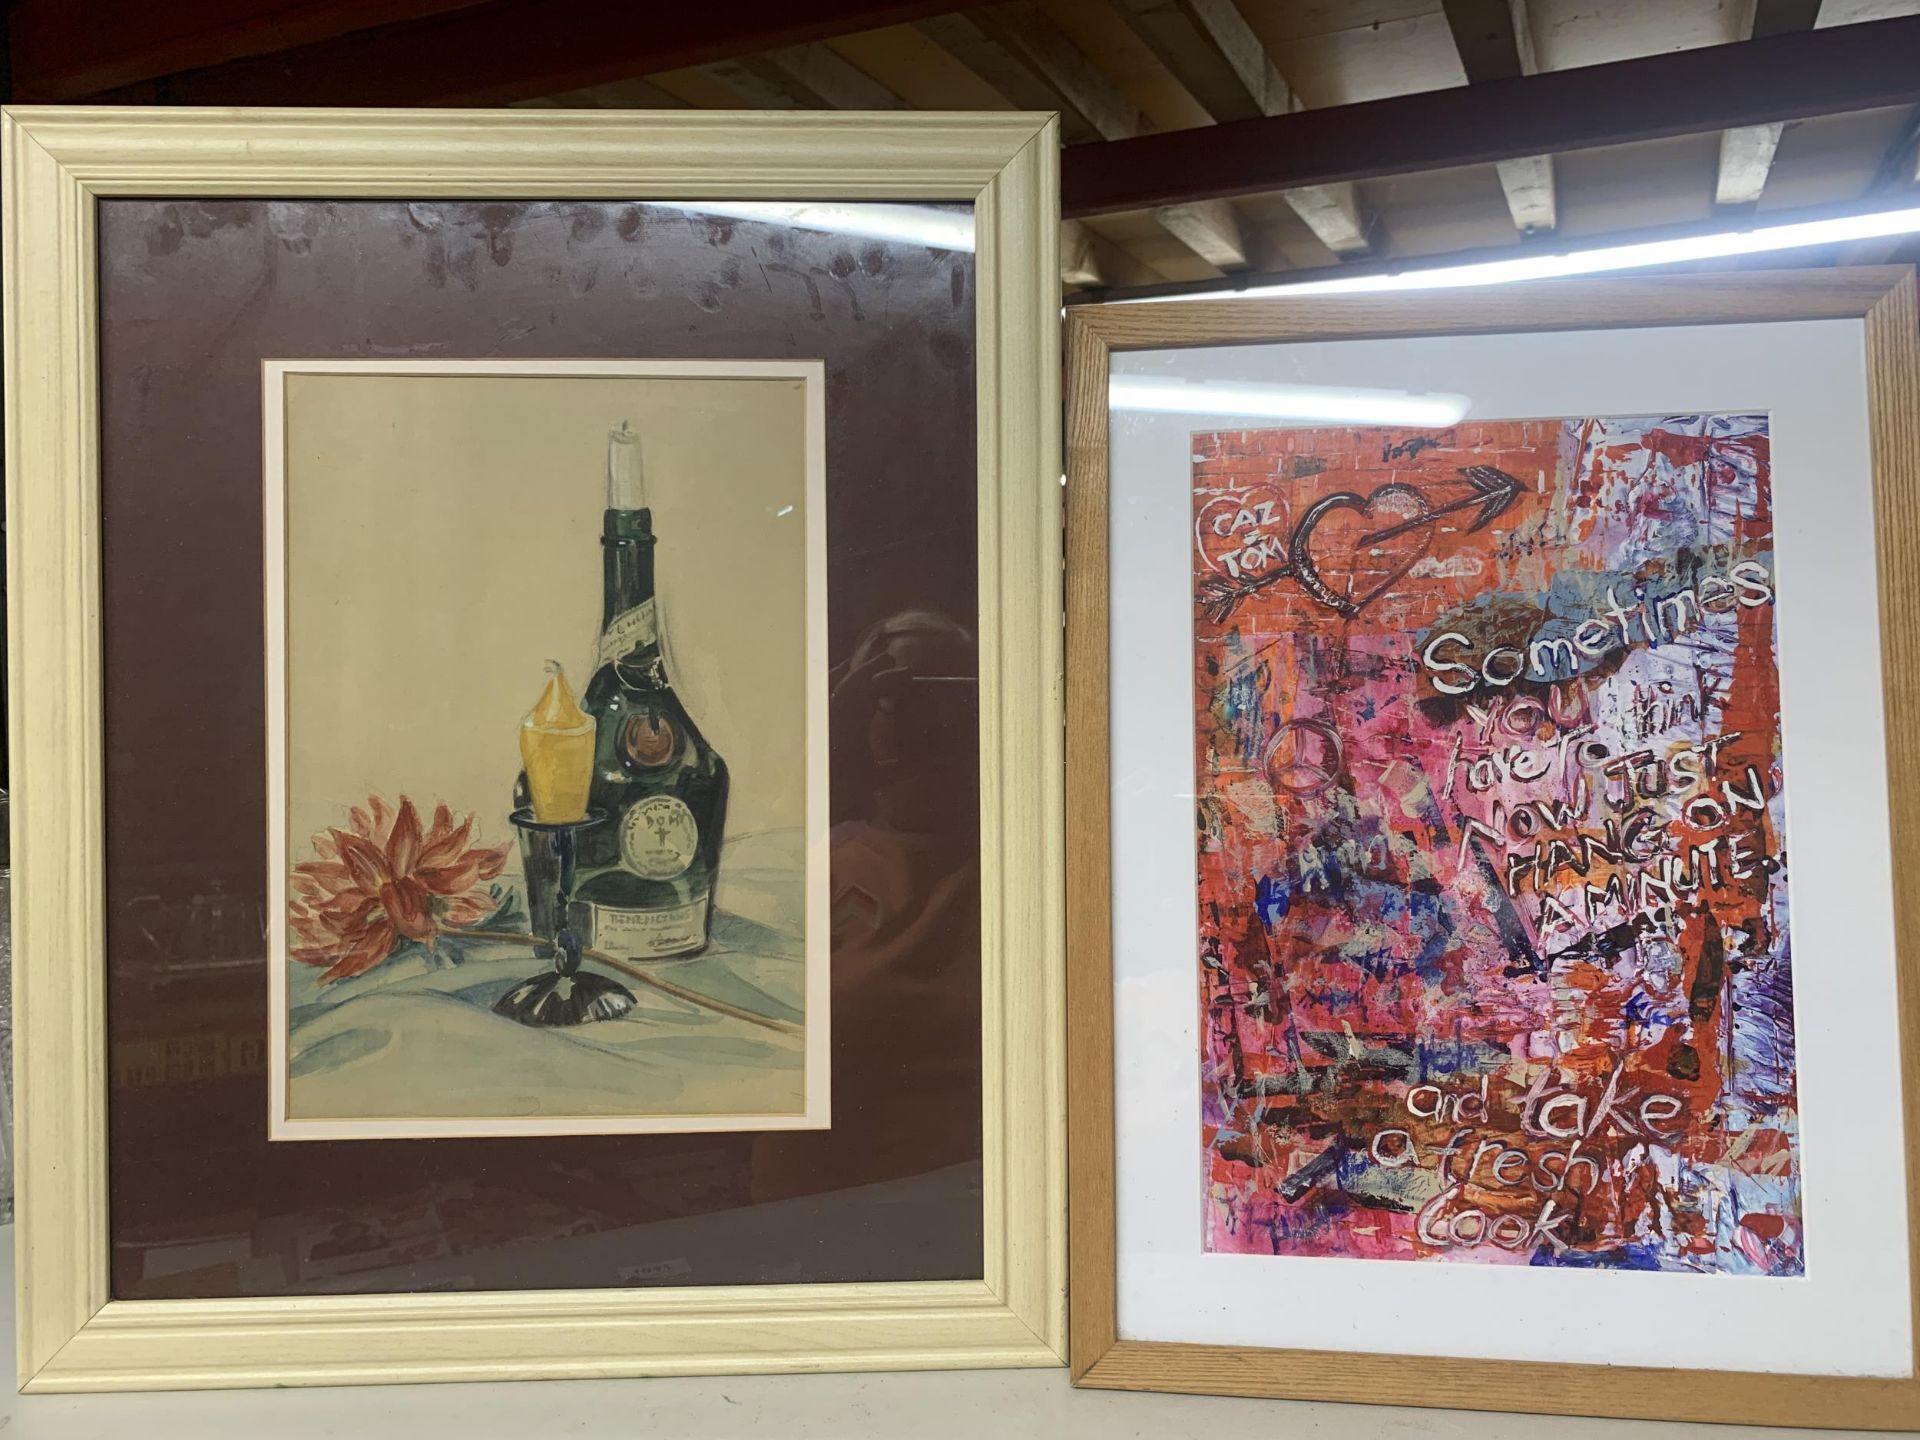 TWO MODERN FRAMED PRINTS, ABSTRACT GRAFFITI EXAMPLE AND STILL LIFE